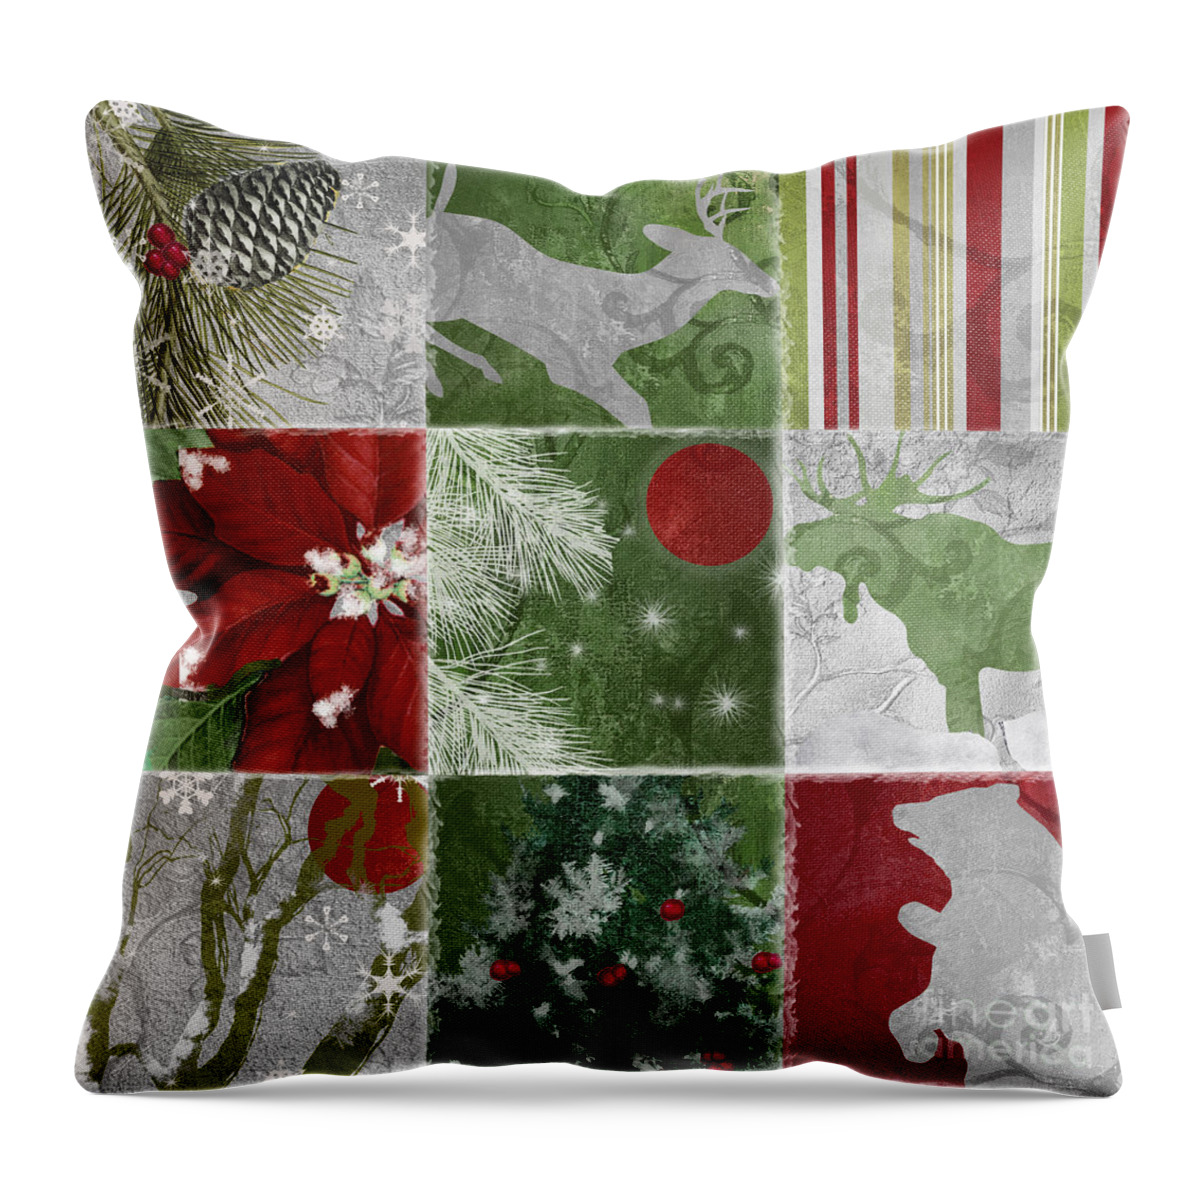 Christmas Patchwork Throw Pillow featuring the painting Red Moon Christmas Patchwork by Mindy Sommers